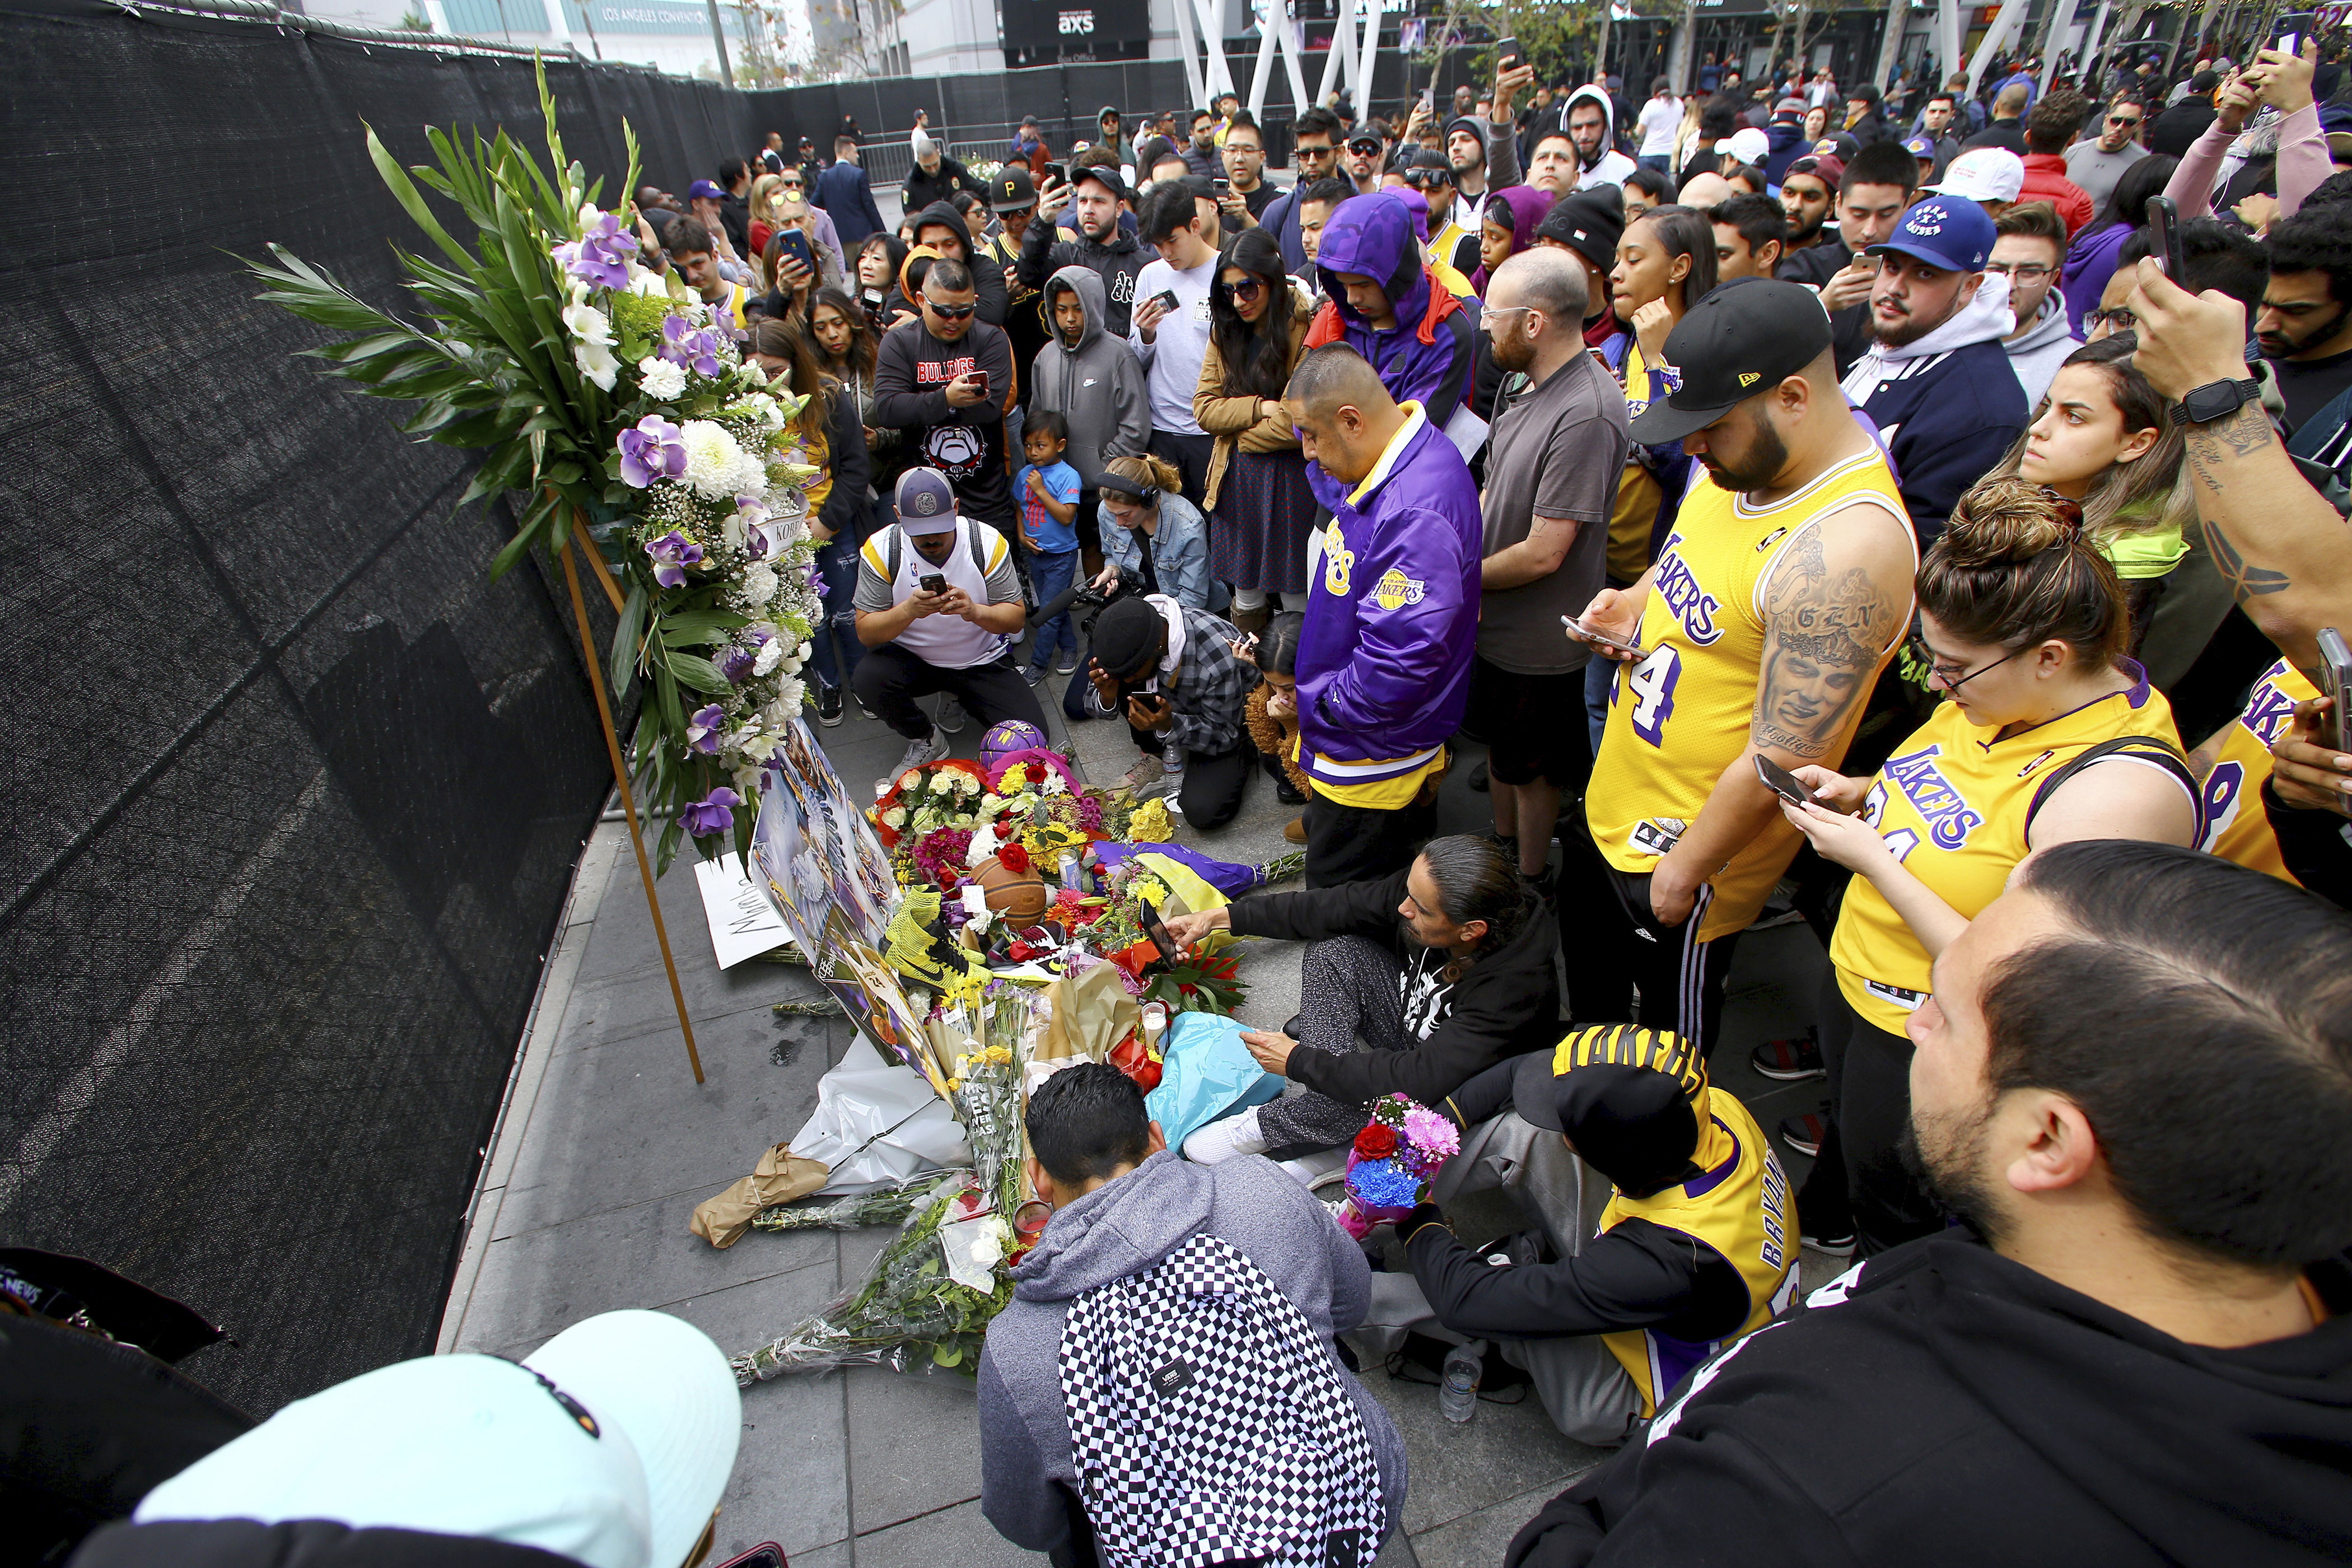 Fans of Kobe Bryant mourn at a memorial to him in front of Staples Center, home of the Los Angeles Lakers, after word of the Lakers star's death in a helicopter crash.